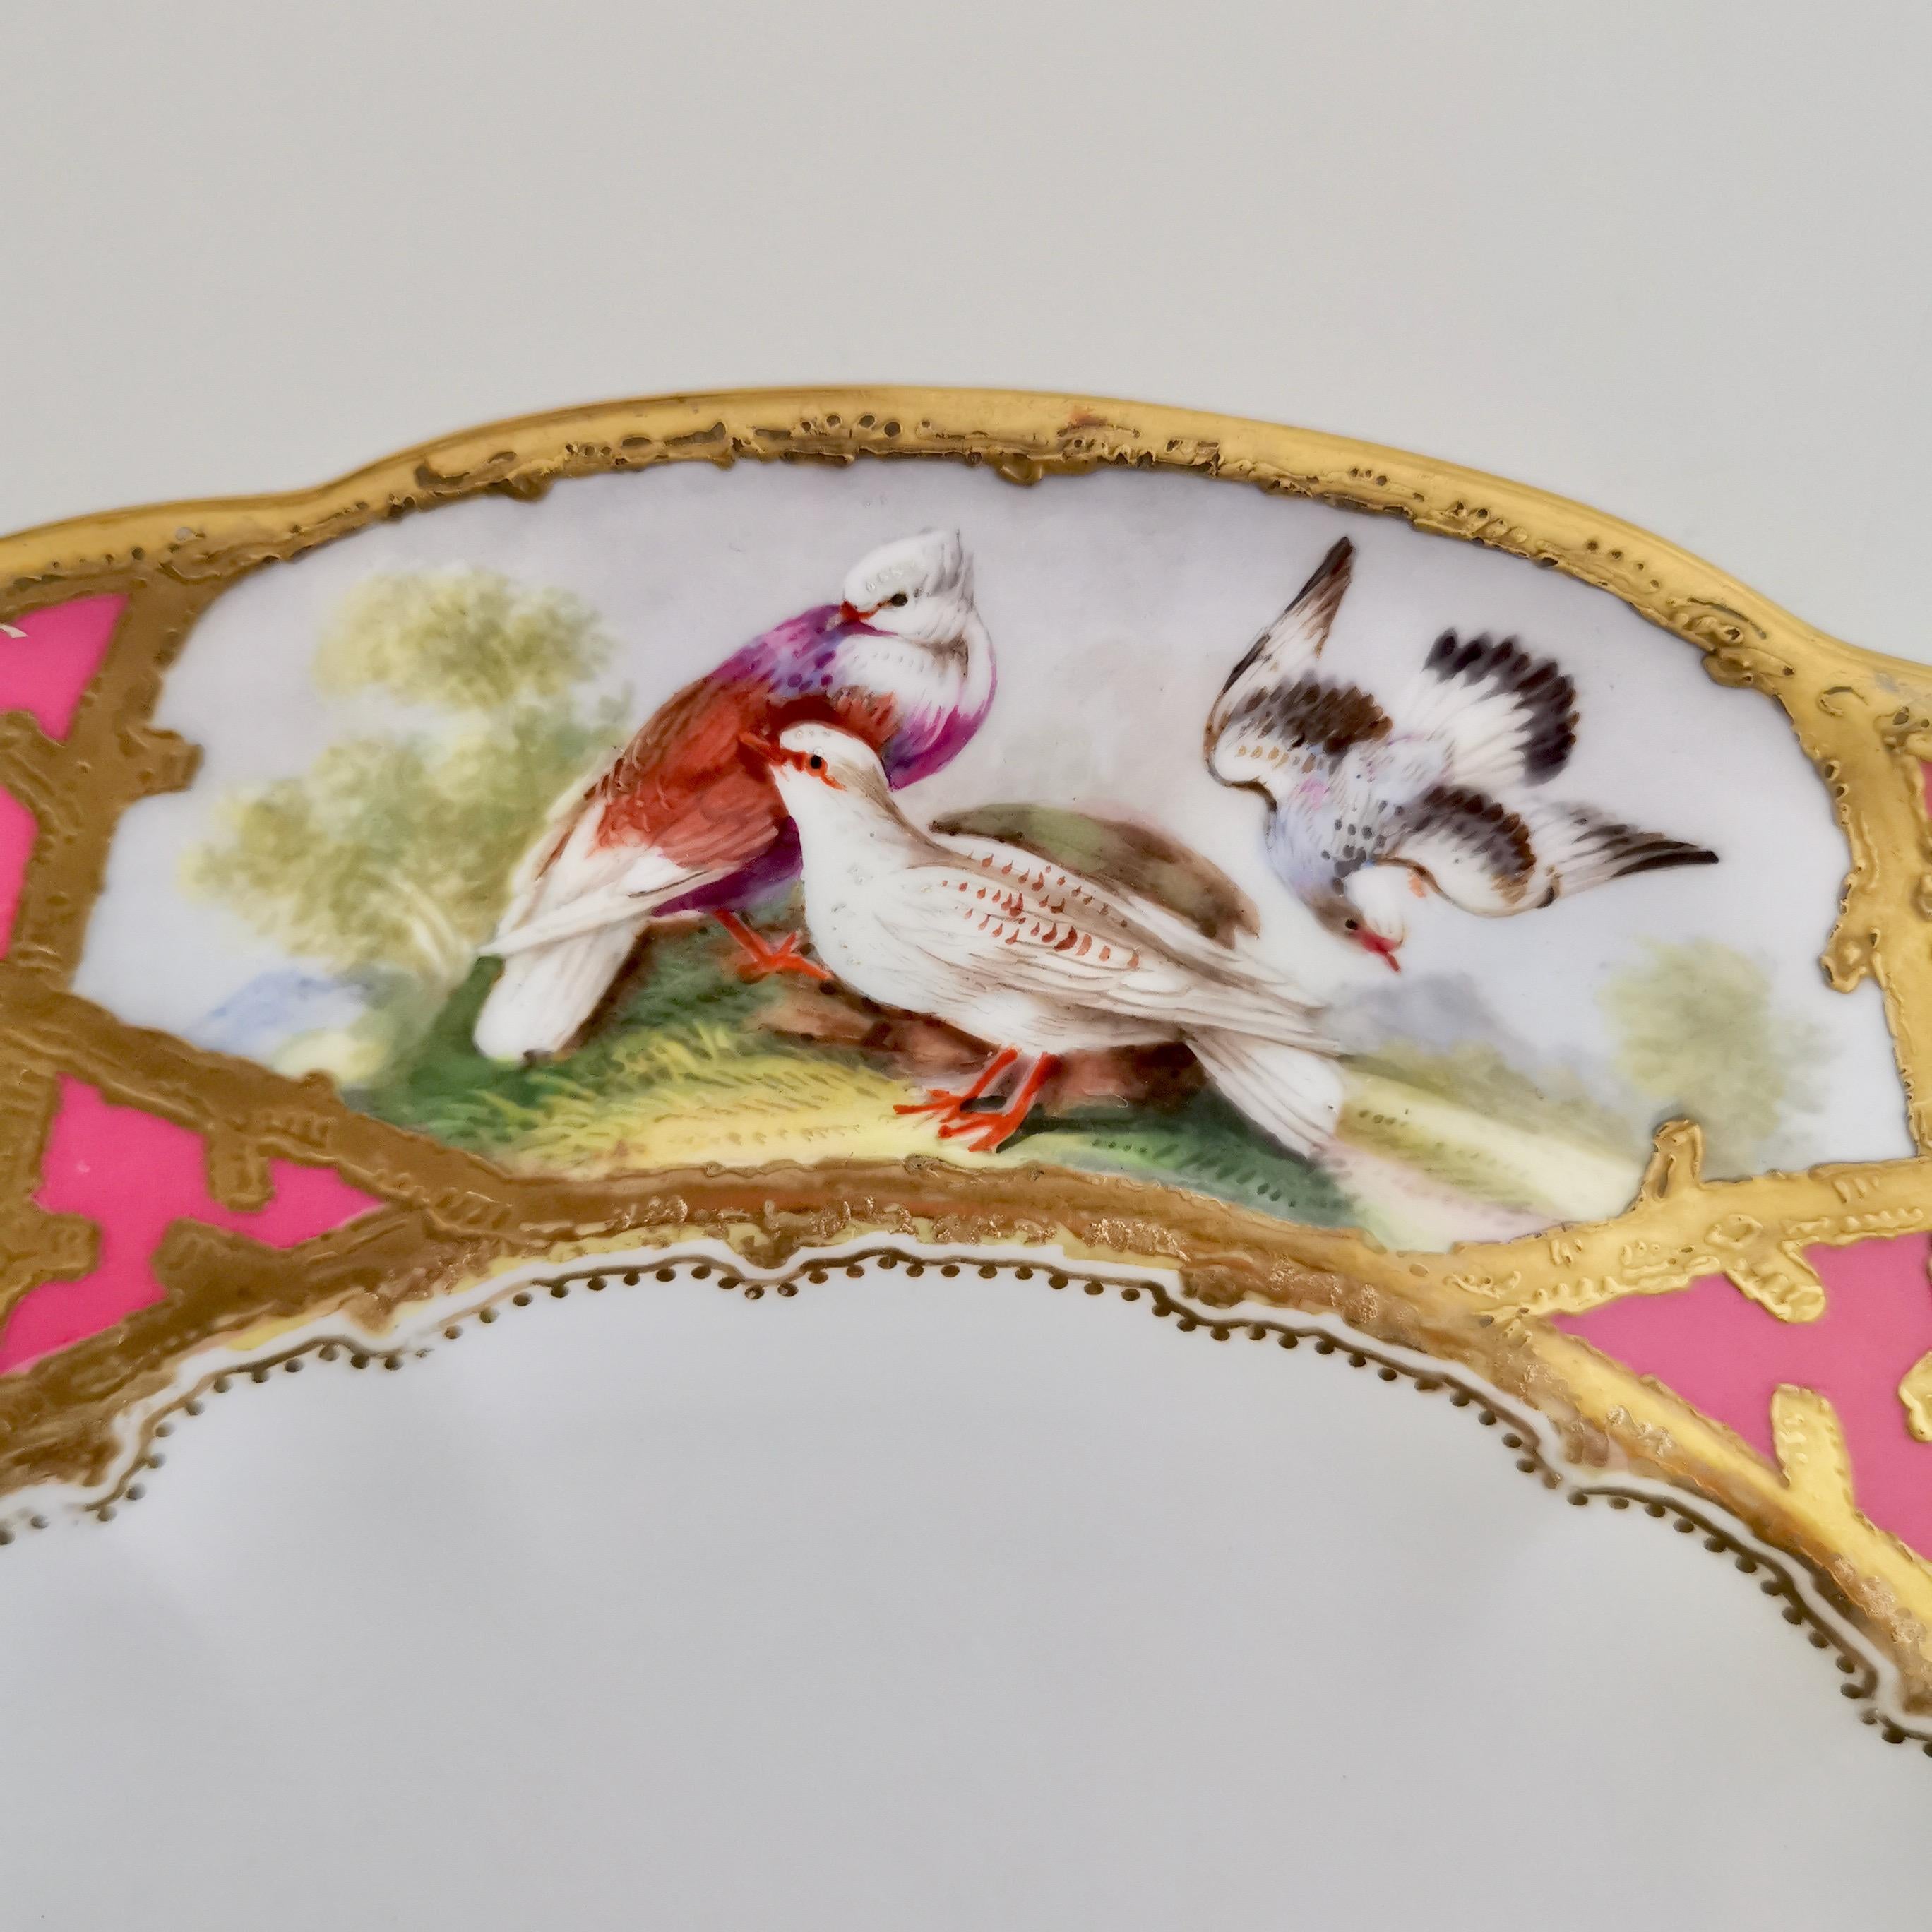 Hand-Painted Coalport Porcelain Plate, Hot Pink with Birds and Fish, Raised Gilt, ca 1870